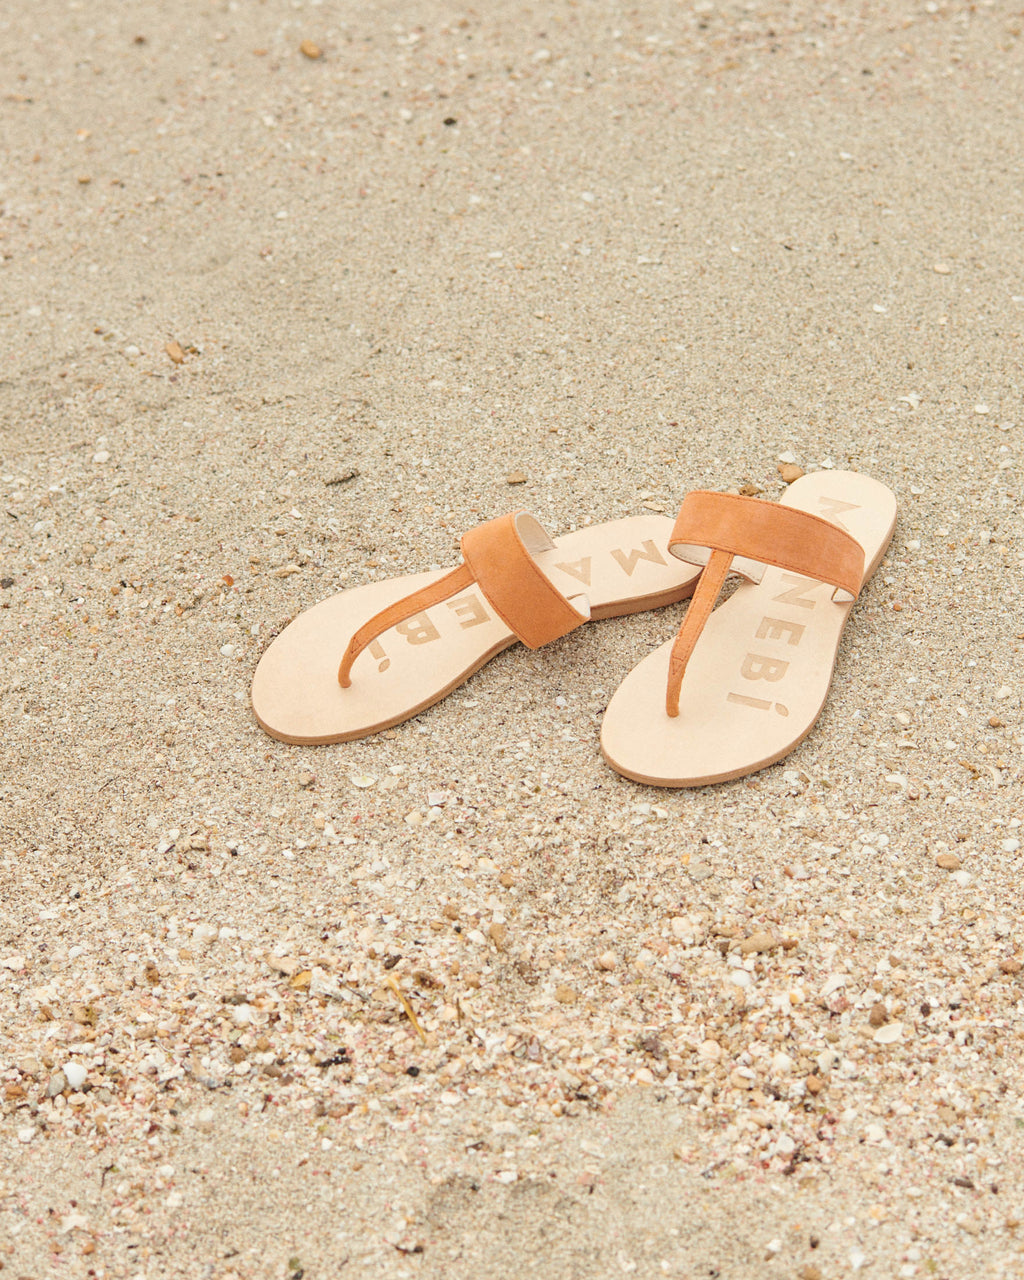 Suede Leather Sandals - Sunset Orange Thongs